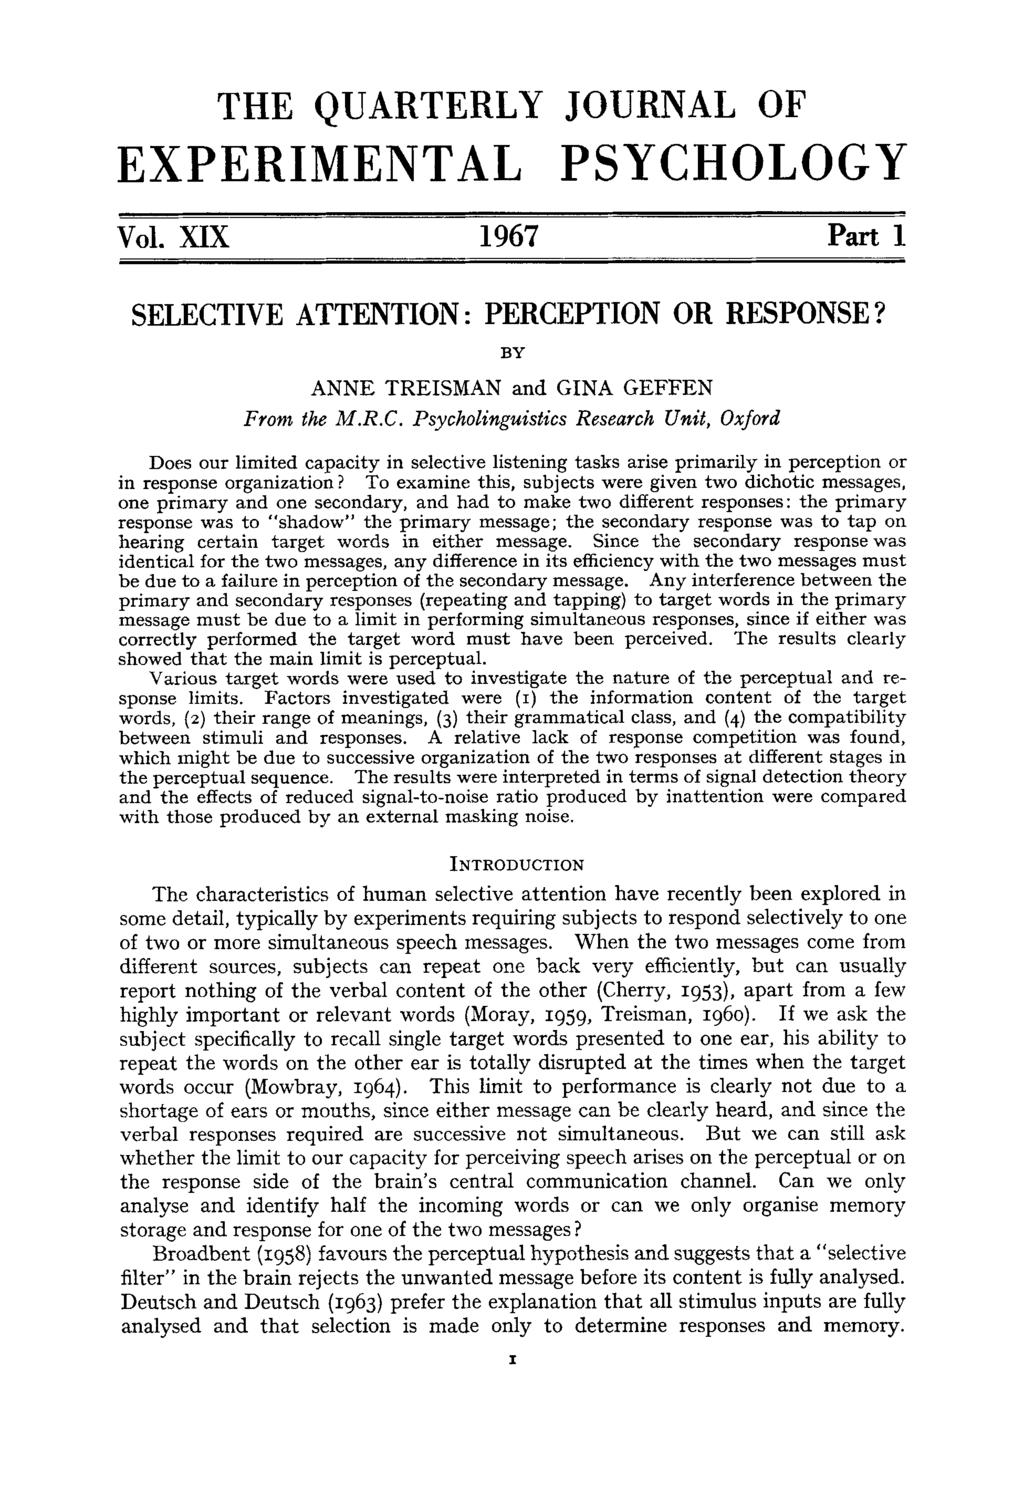 THE QUARTERLY JOURNAL OF EXPERIMENTAL PSYCHOLOGY VOl. XIX 1967 Part 1 SELECTIVE ATTENTION : PERCEPTION OR RESPONSE? BY ANNE TREISMAN and GINA GEFFEN Front the M.R.C. Psycholinguistics Research Umit, Oxford Does our limited capacity in selective listening tasks arise primarily in perception or in response organization?